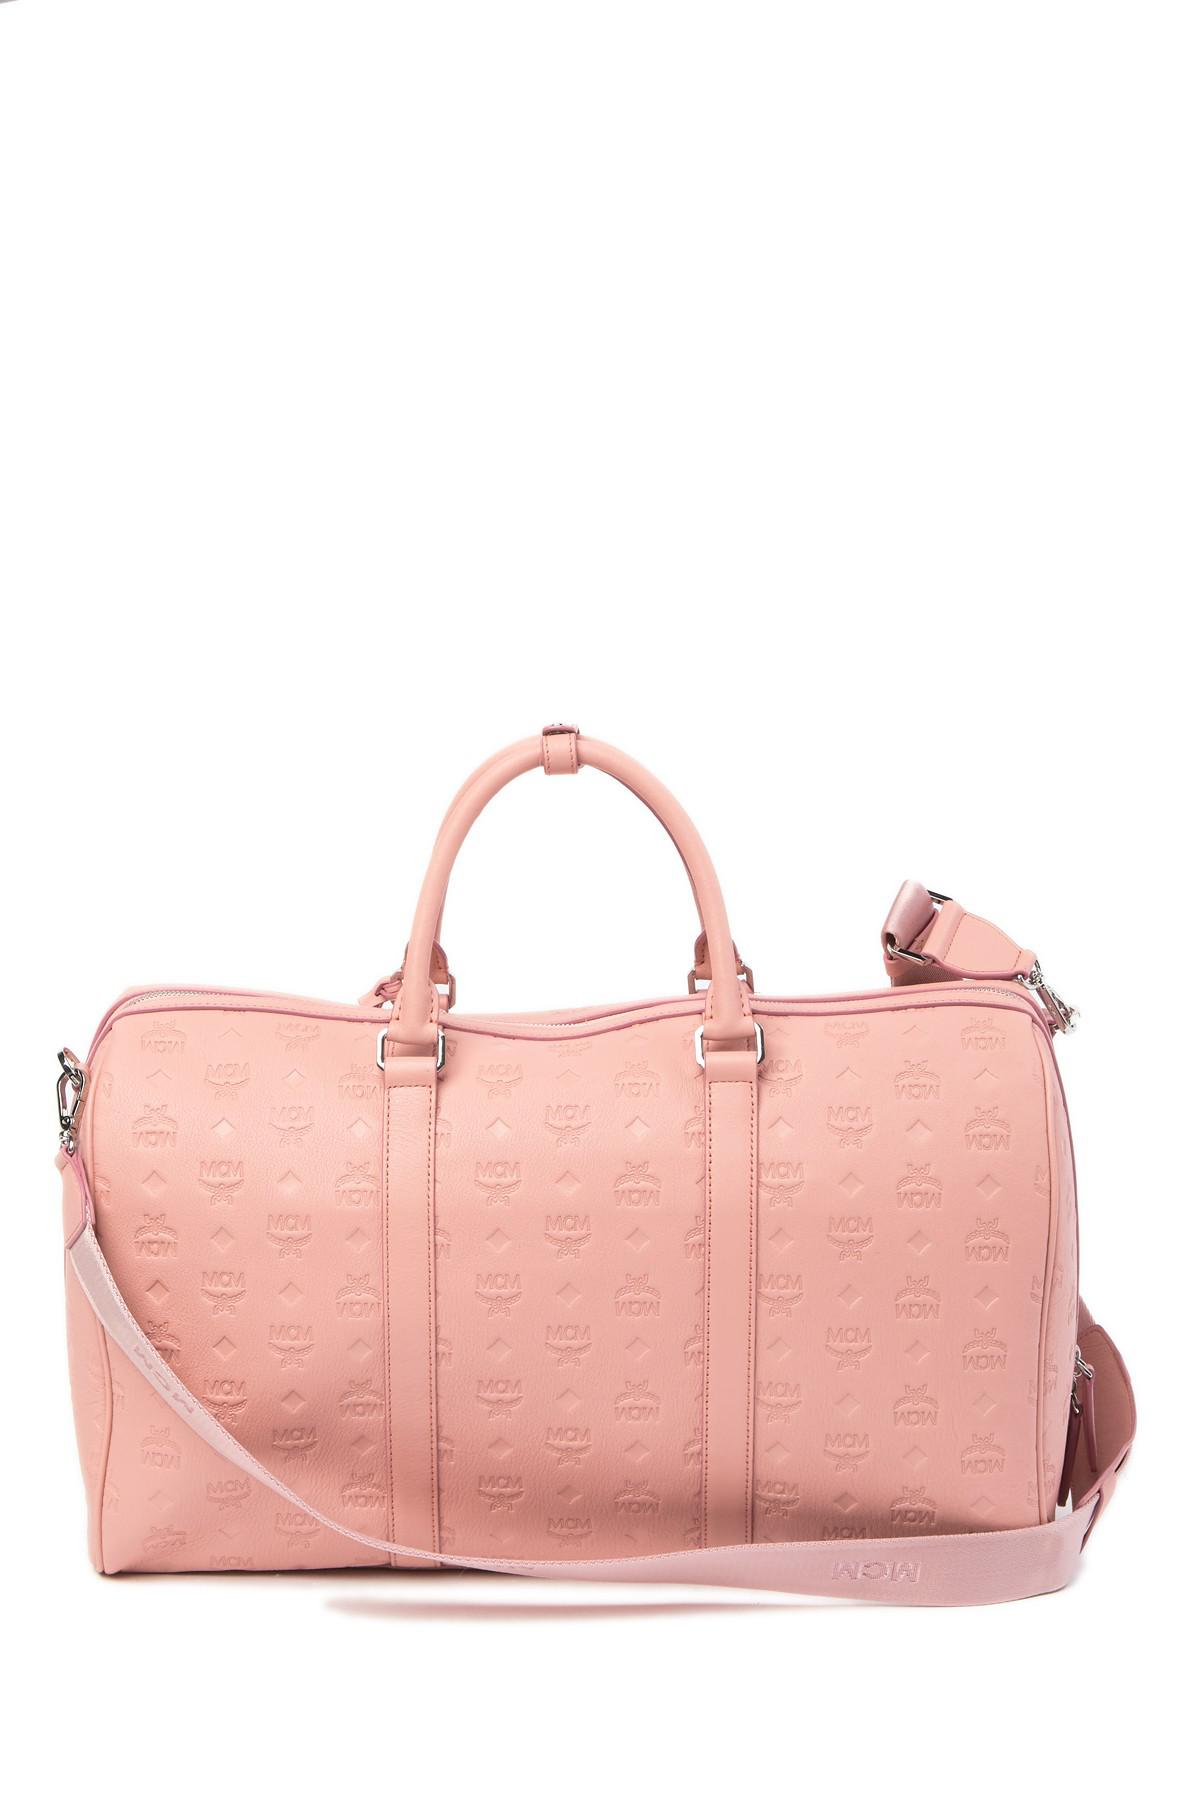 MCM Ottomar Monogrammed Leather Duffle in Pink Blush (Pink) - Lyst